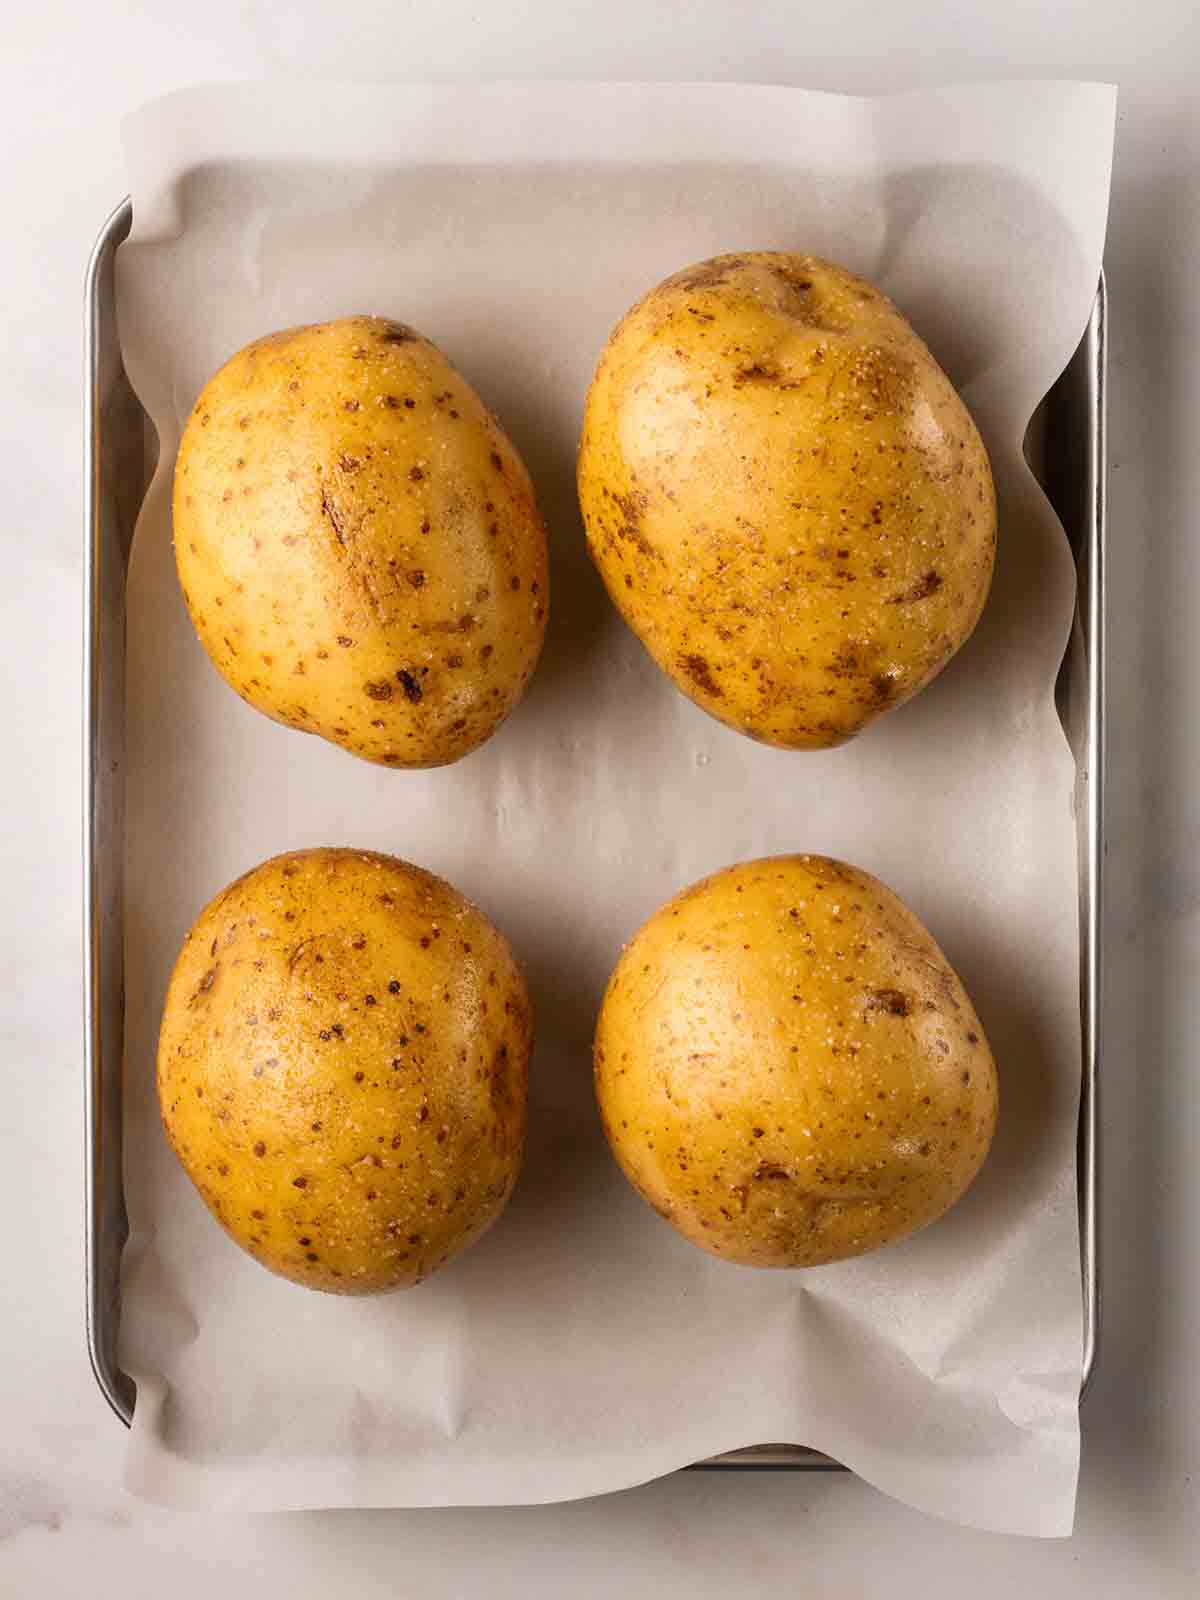 Four jacket potatoes on a baking tray, ready to be cooked in the air fryer.